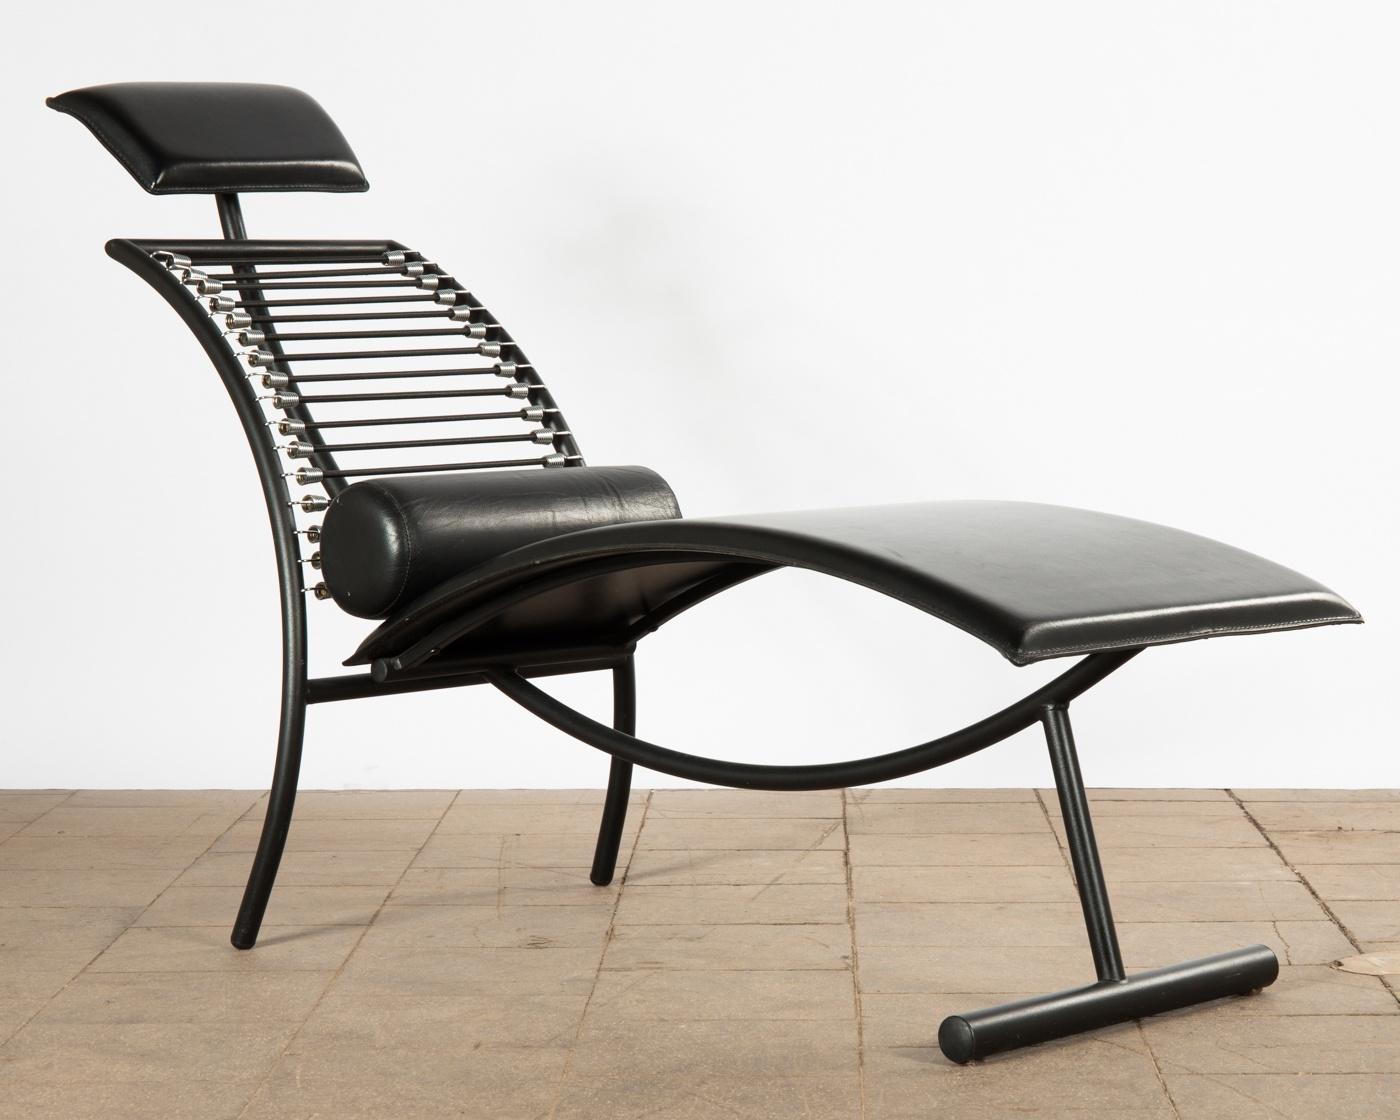 Metal Post-Modern Italian Chaise Lounge Chair in Faux Black Leather, 1980s For Sale